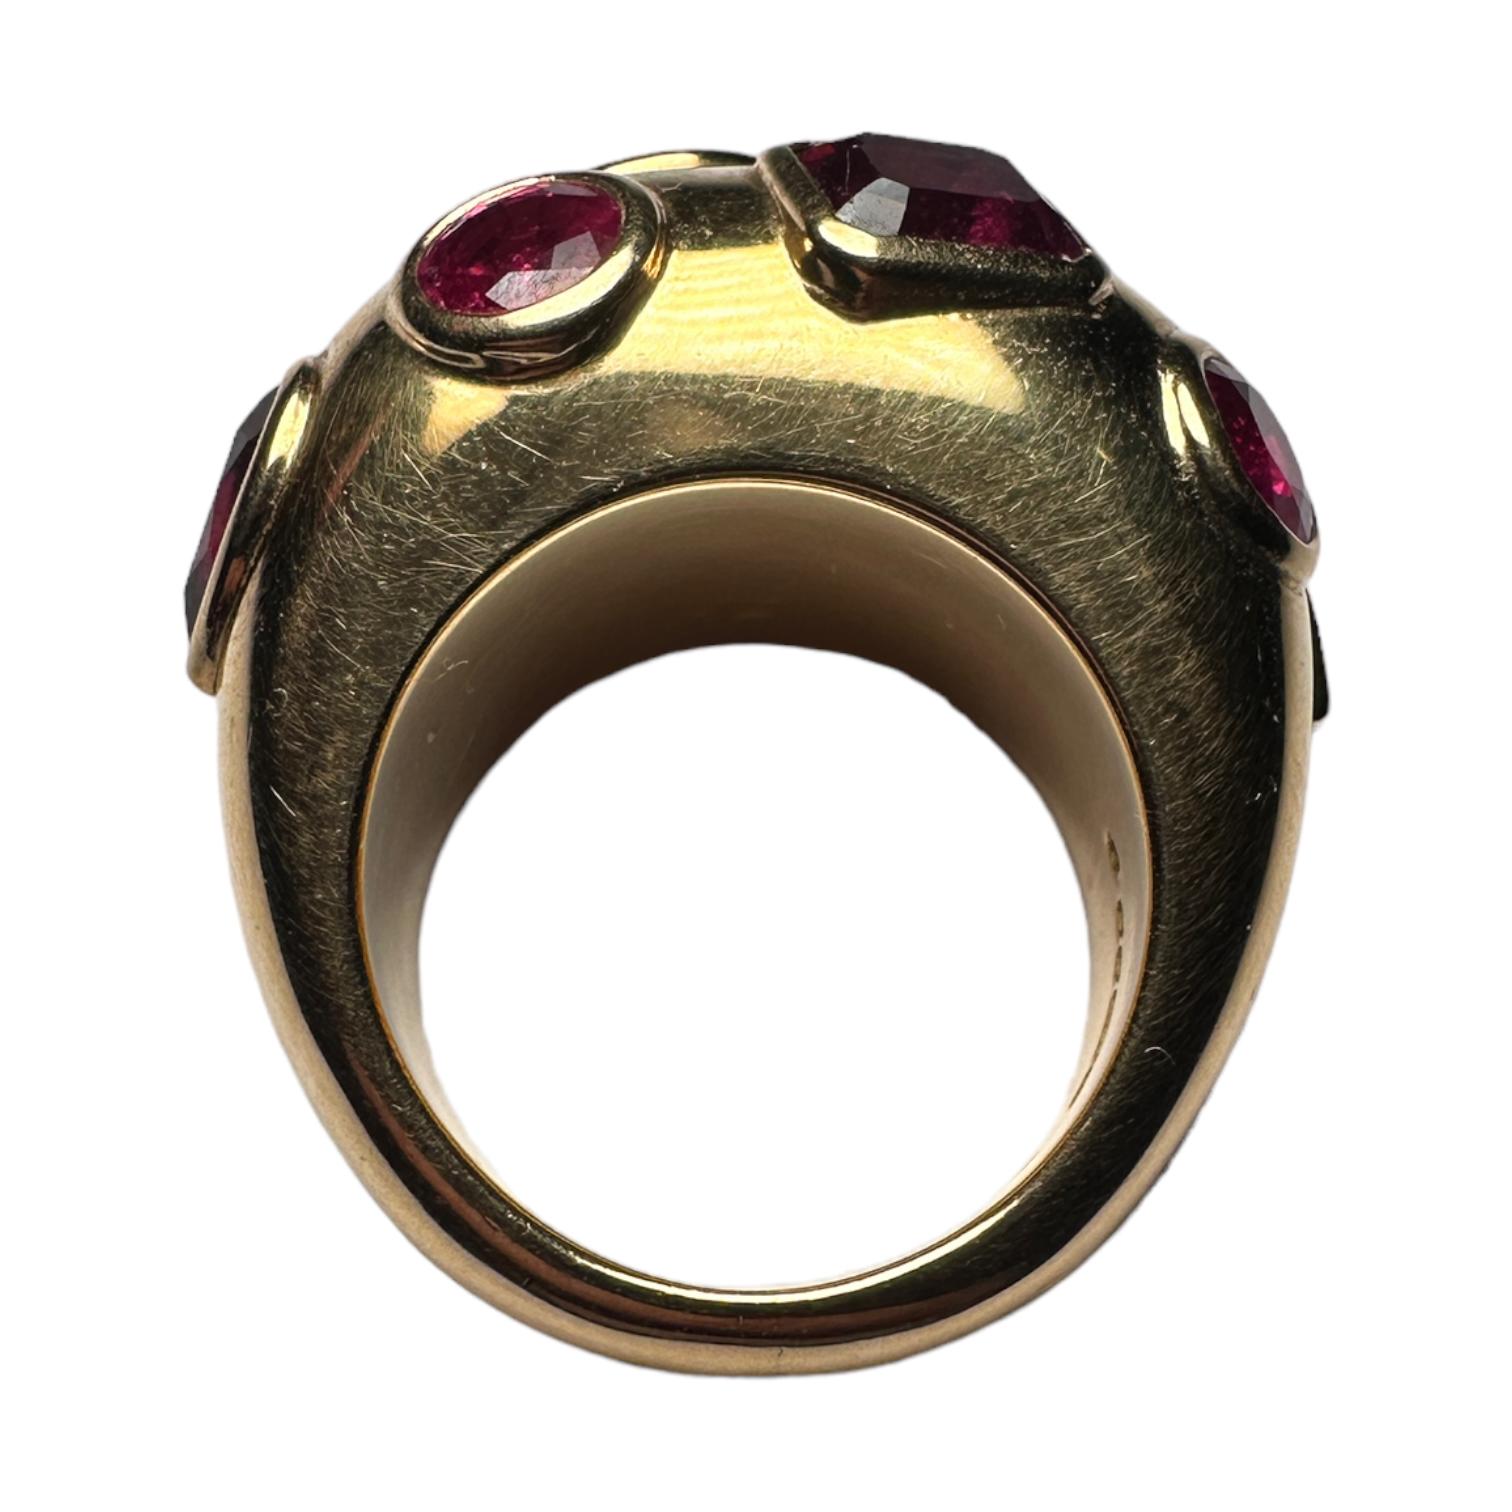 18k Gold Ring with Rubies, Rubellite Tourmalines and Red Spinels For Sale 7